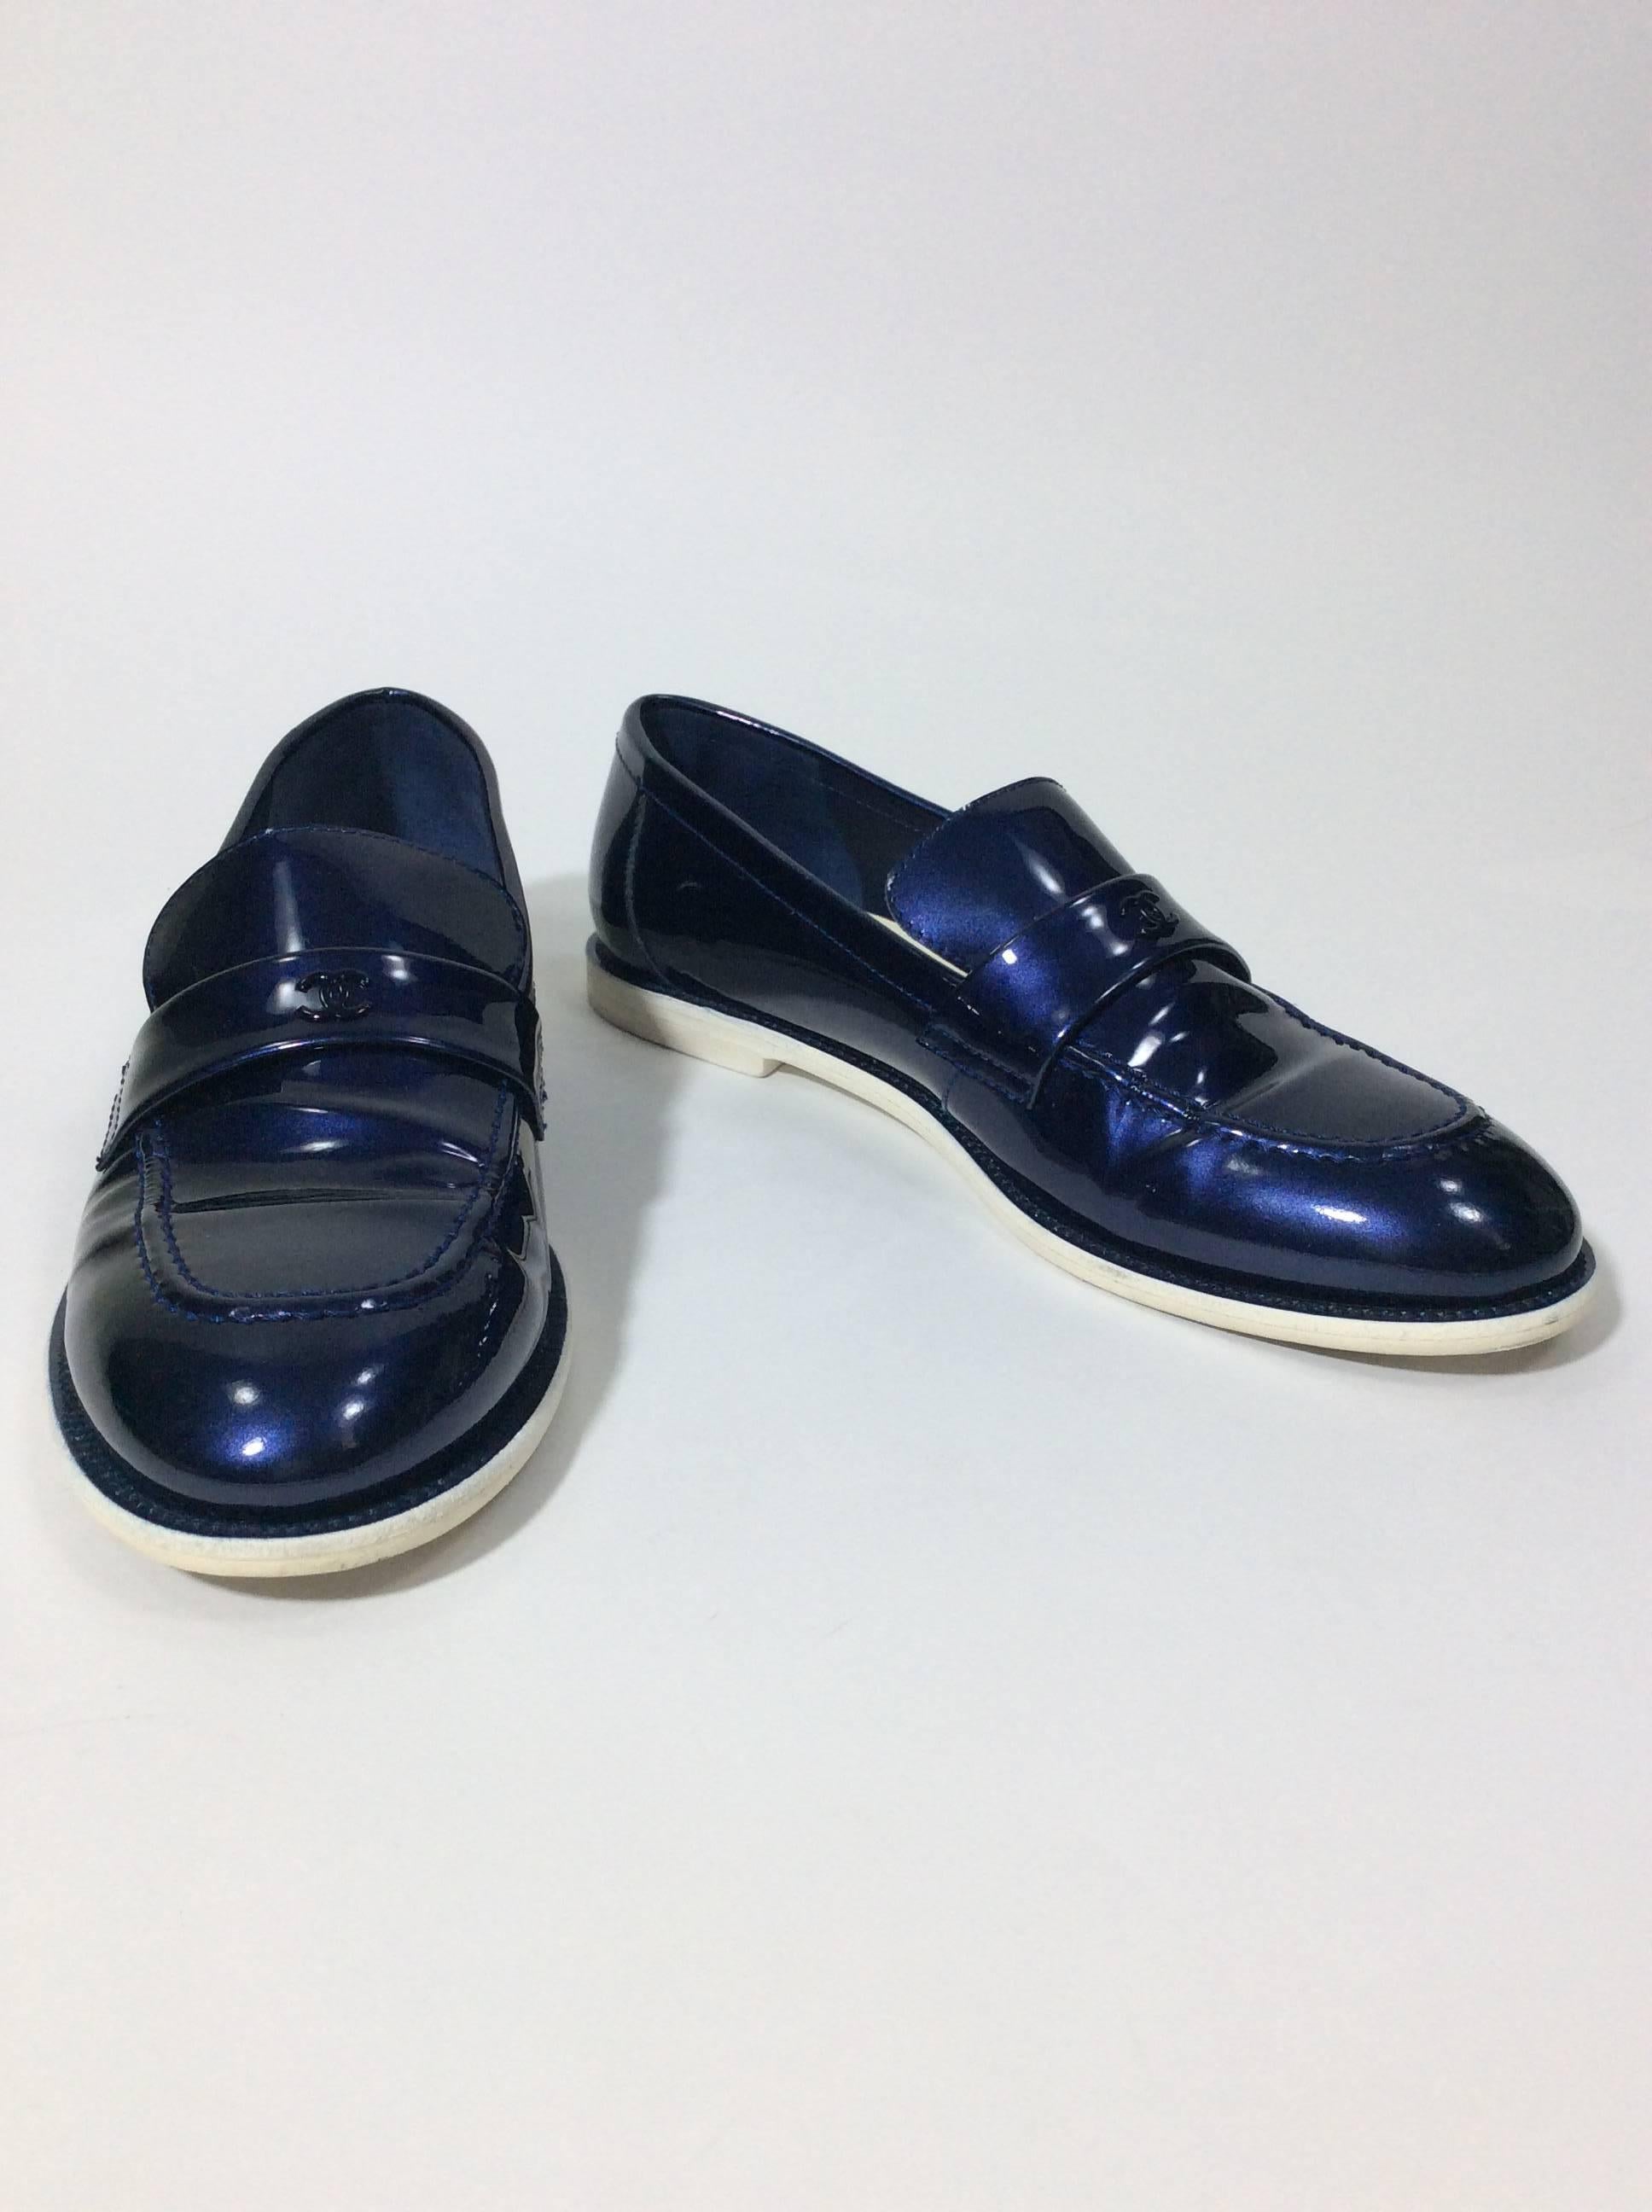 Patent Leather Midnight Blue Loafer
CC Emblem on Shoe Strap
3.75" Inch Sole Width
Size UK 39.5 (Equates to US 8-9)
